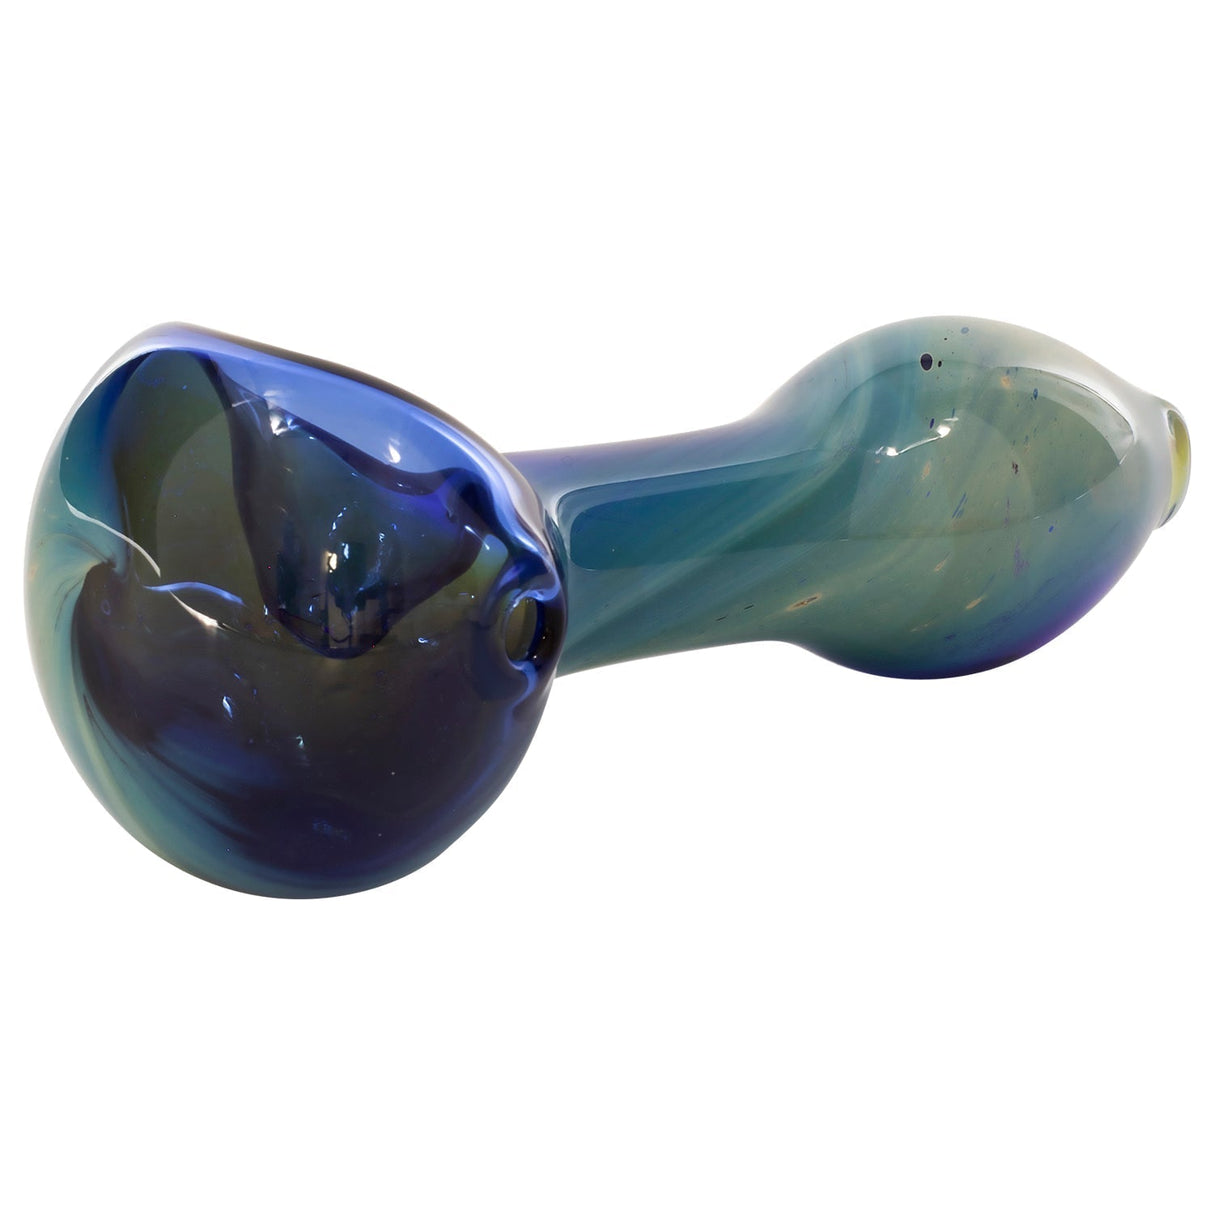 LA Pipes Nebula Spoon Hand Pipe in Borosilicate Glass with Compact Design, Side View